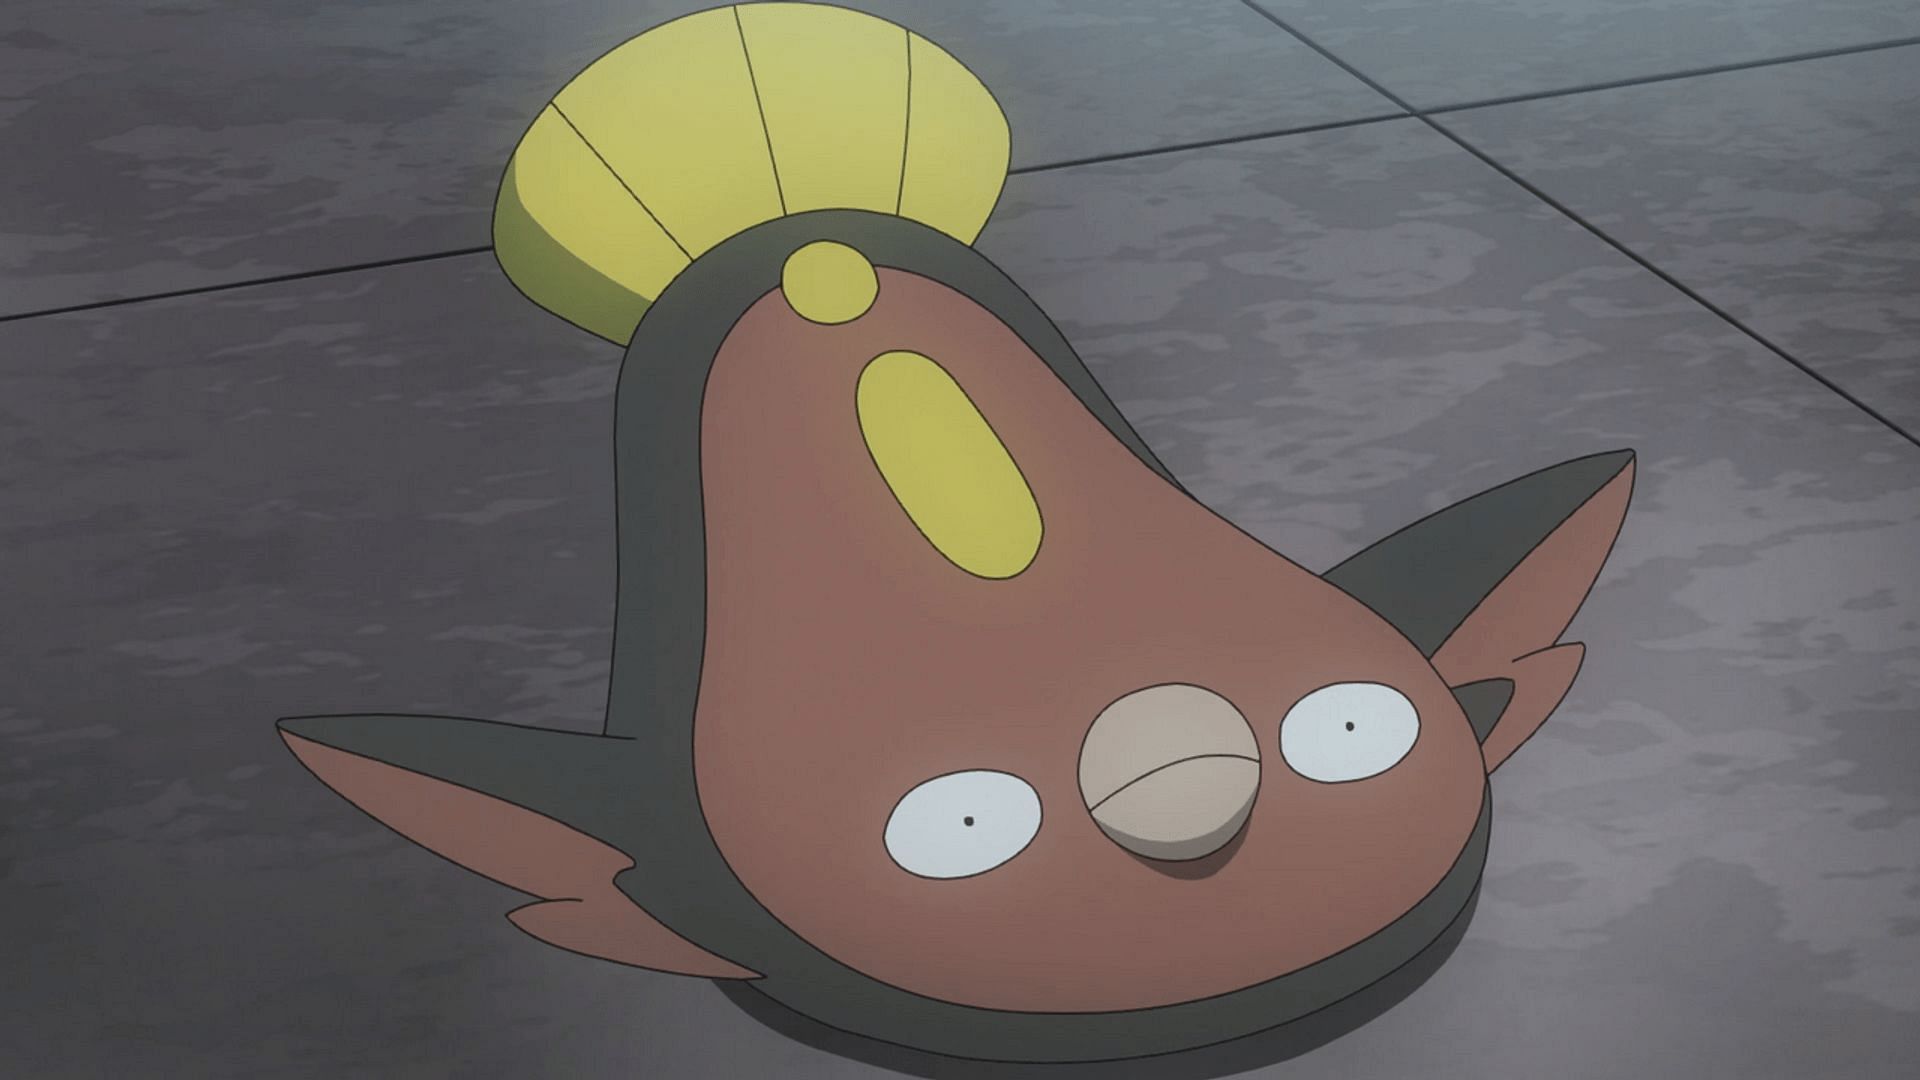 A Stunfisk that can be found in the Unova region as it appears in the anime (Image via The Pokemon Company)